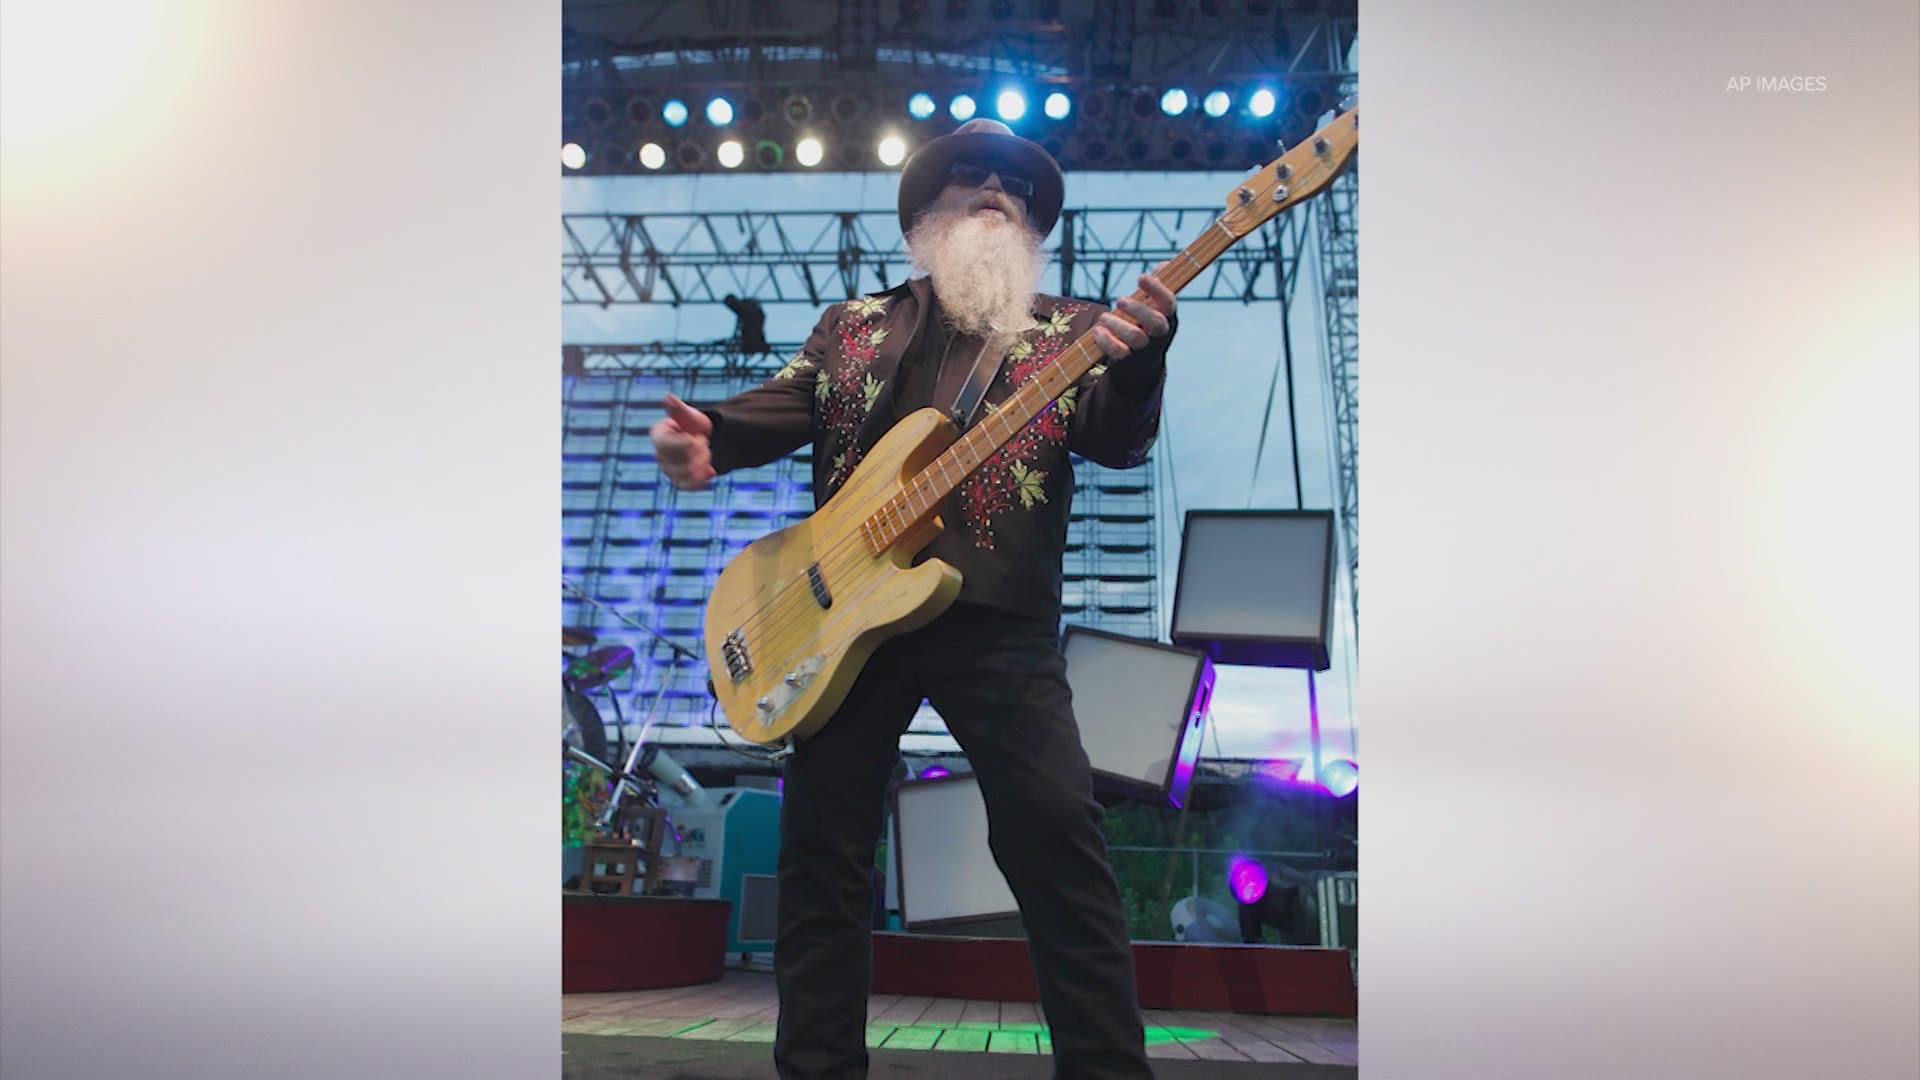 ZZ Top bass guitarist Dusty Hill passed away Wednesday at his home in Houston, according to a post on the band’s Facebook page.